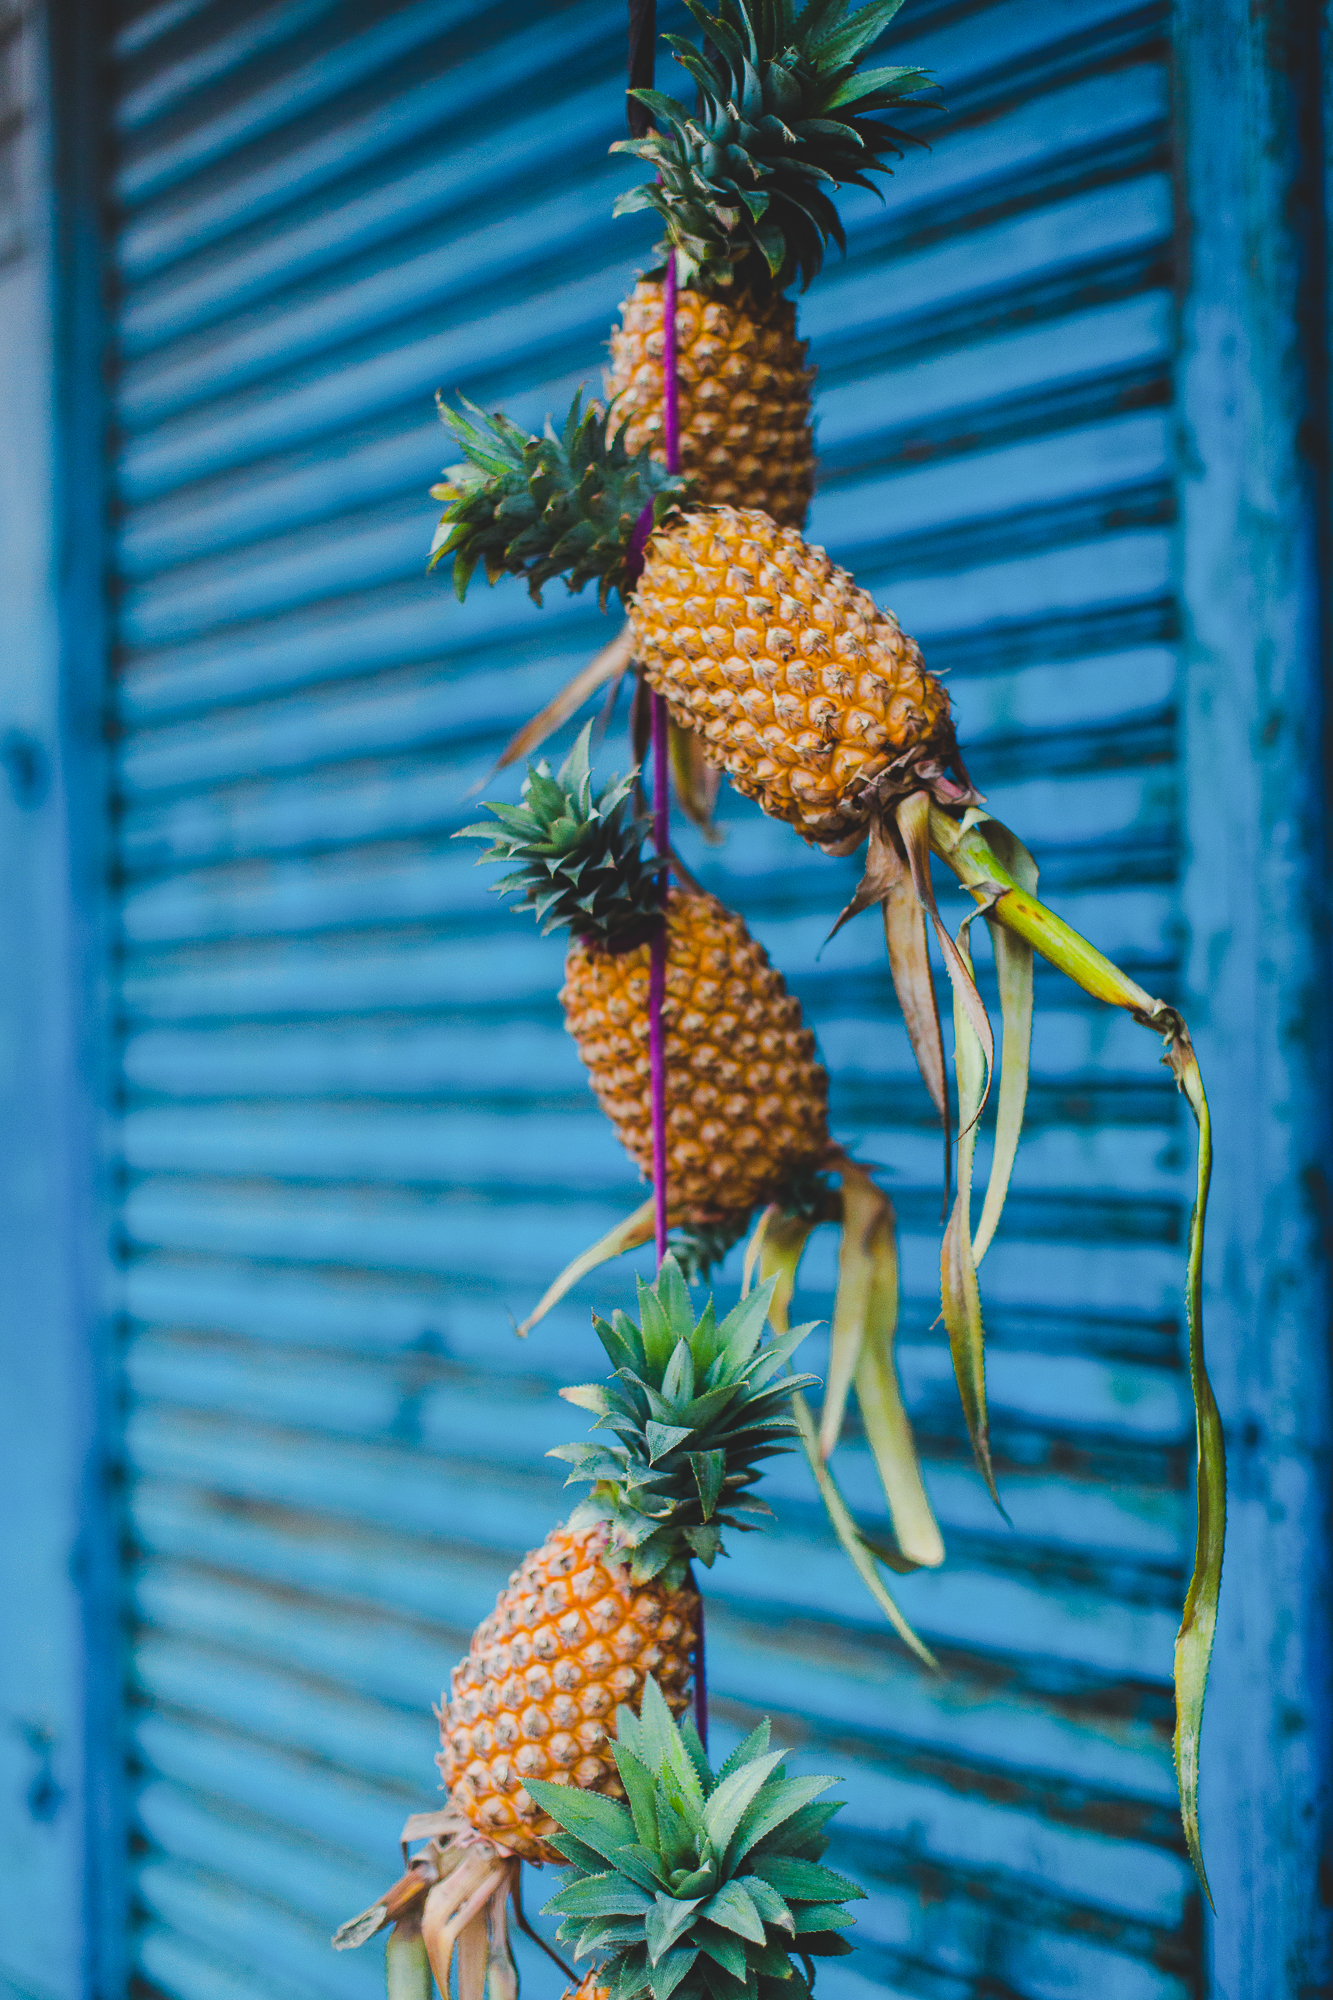 Pineapples for sale hung up